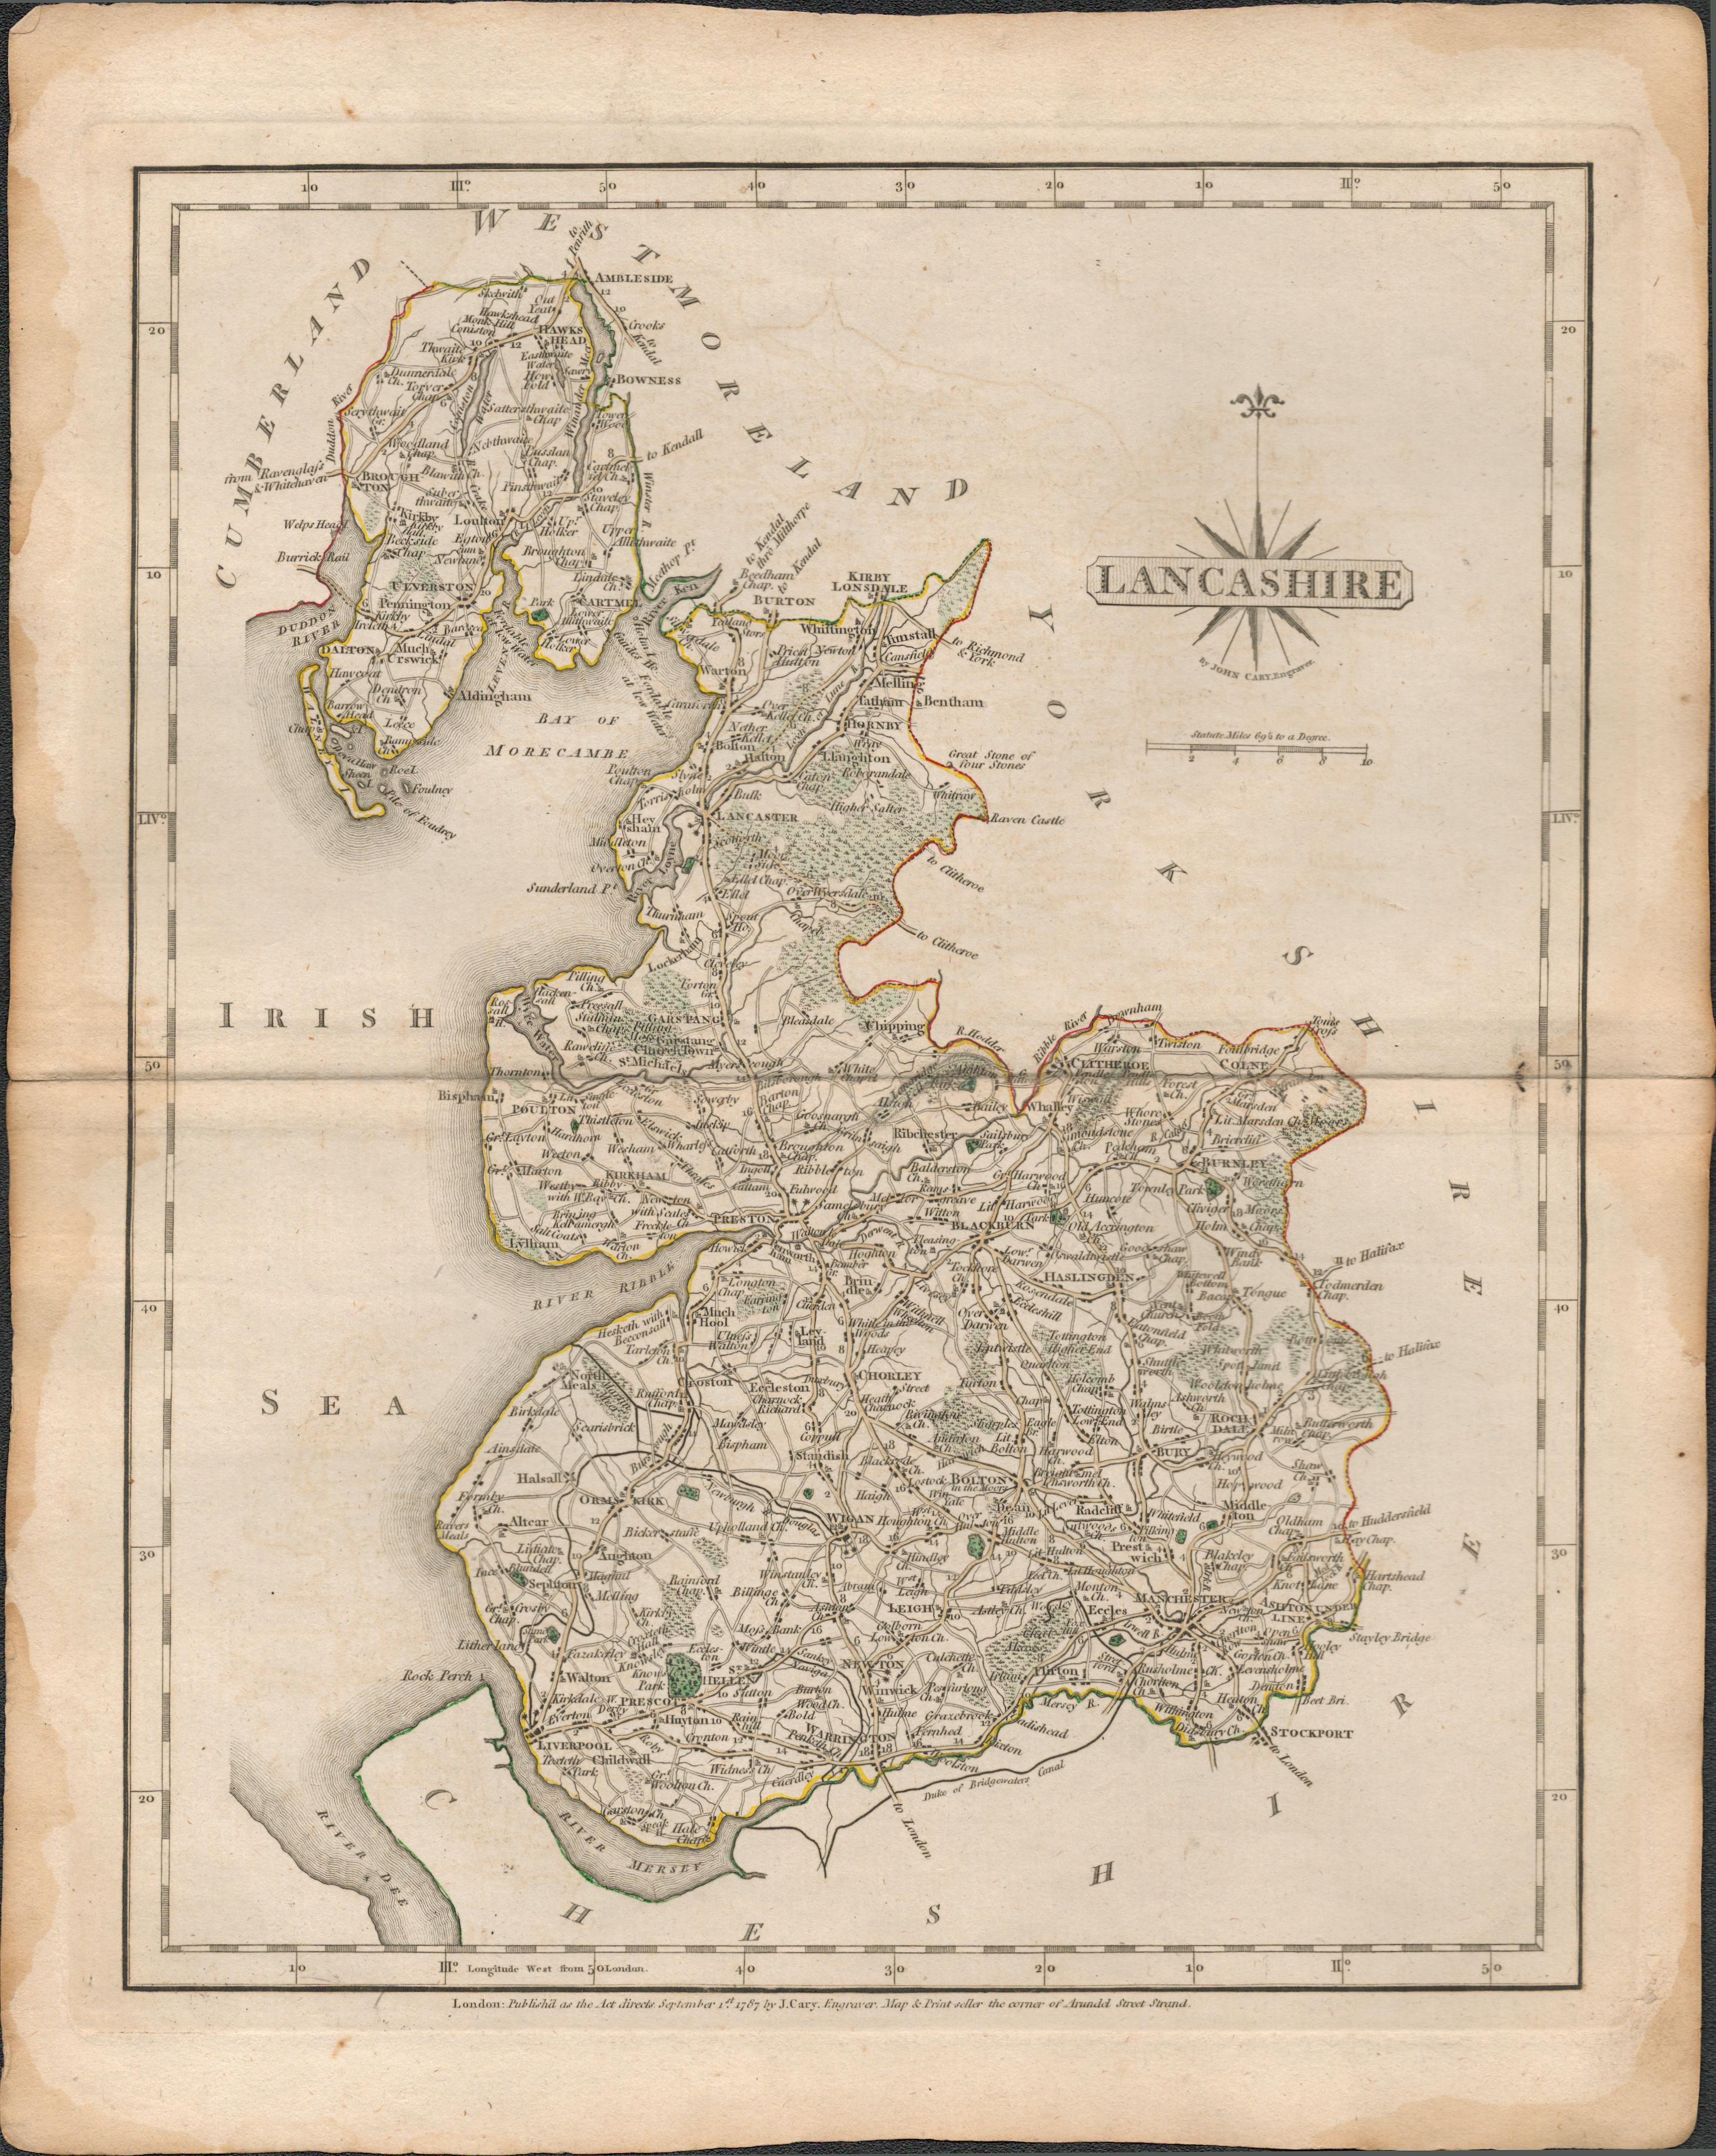 Lancashire County John Cary 1787 Antique Hand Coloured Map.